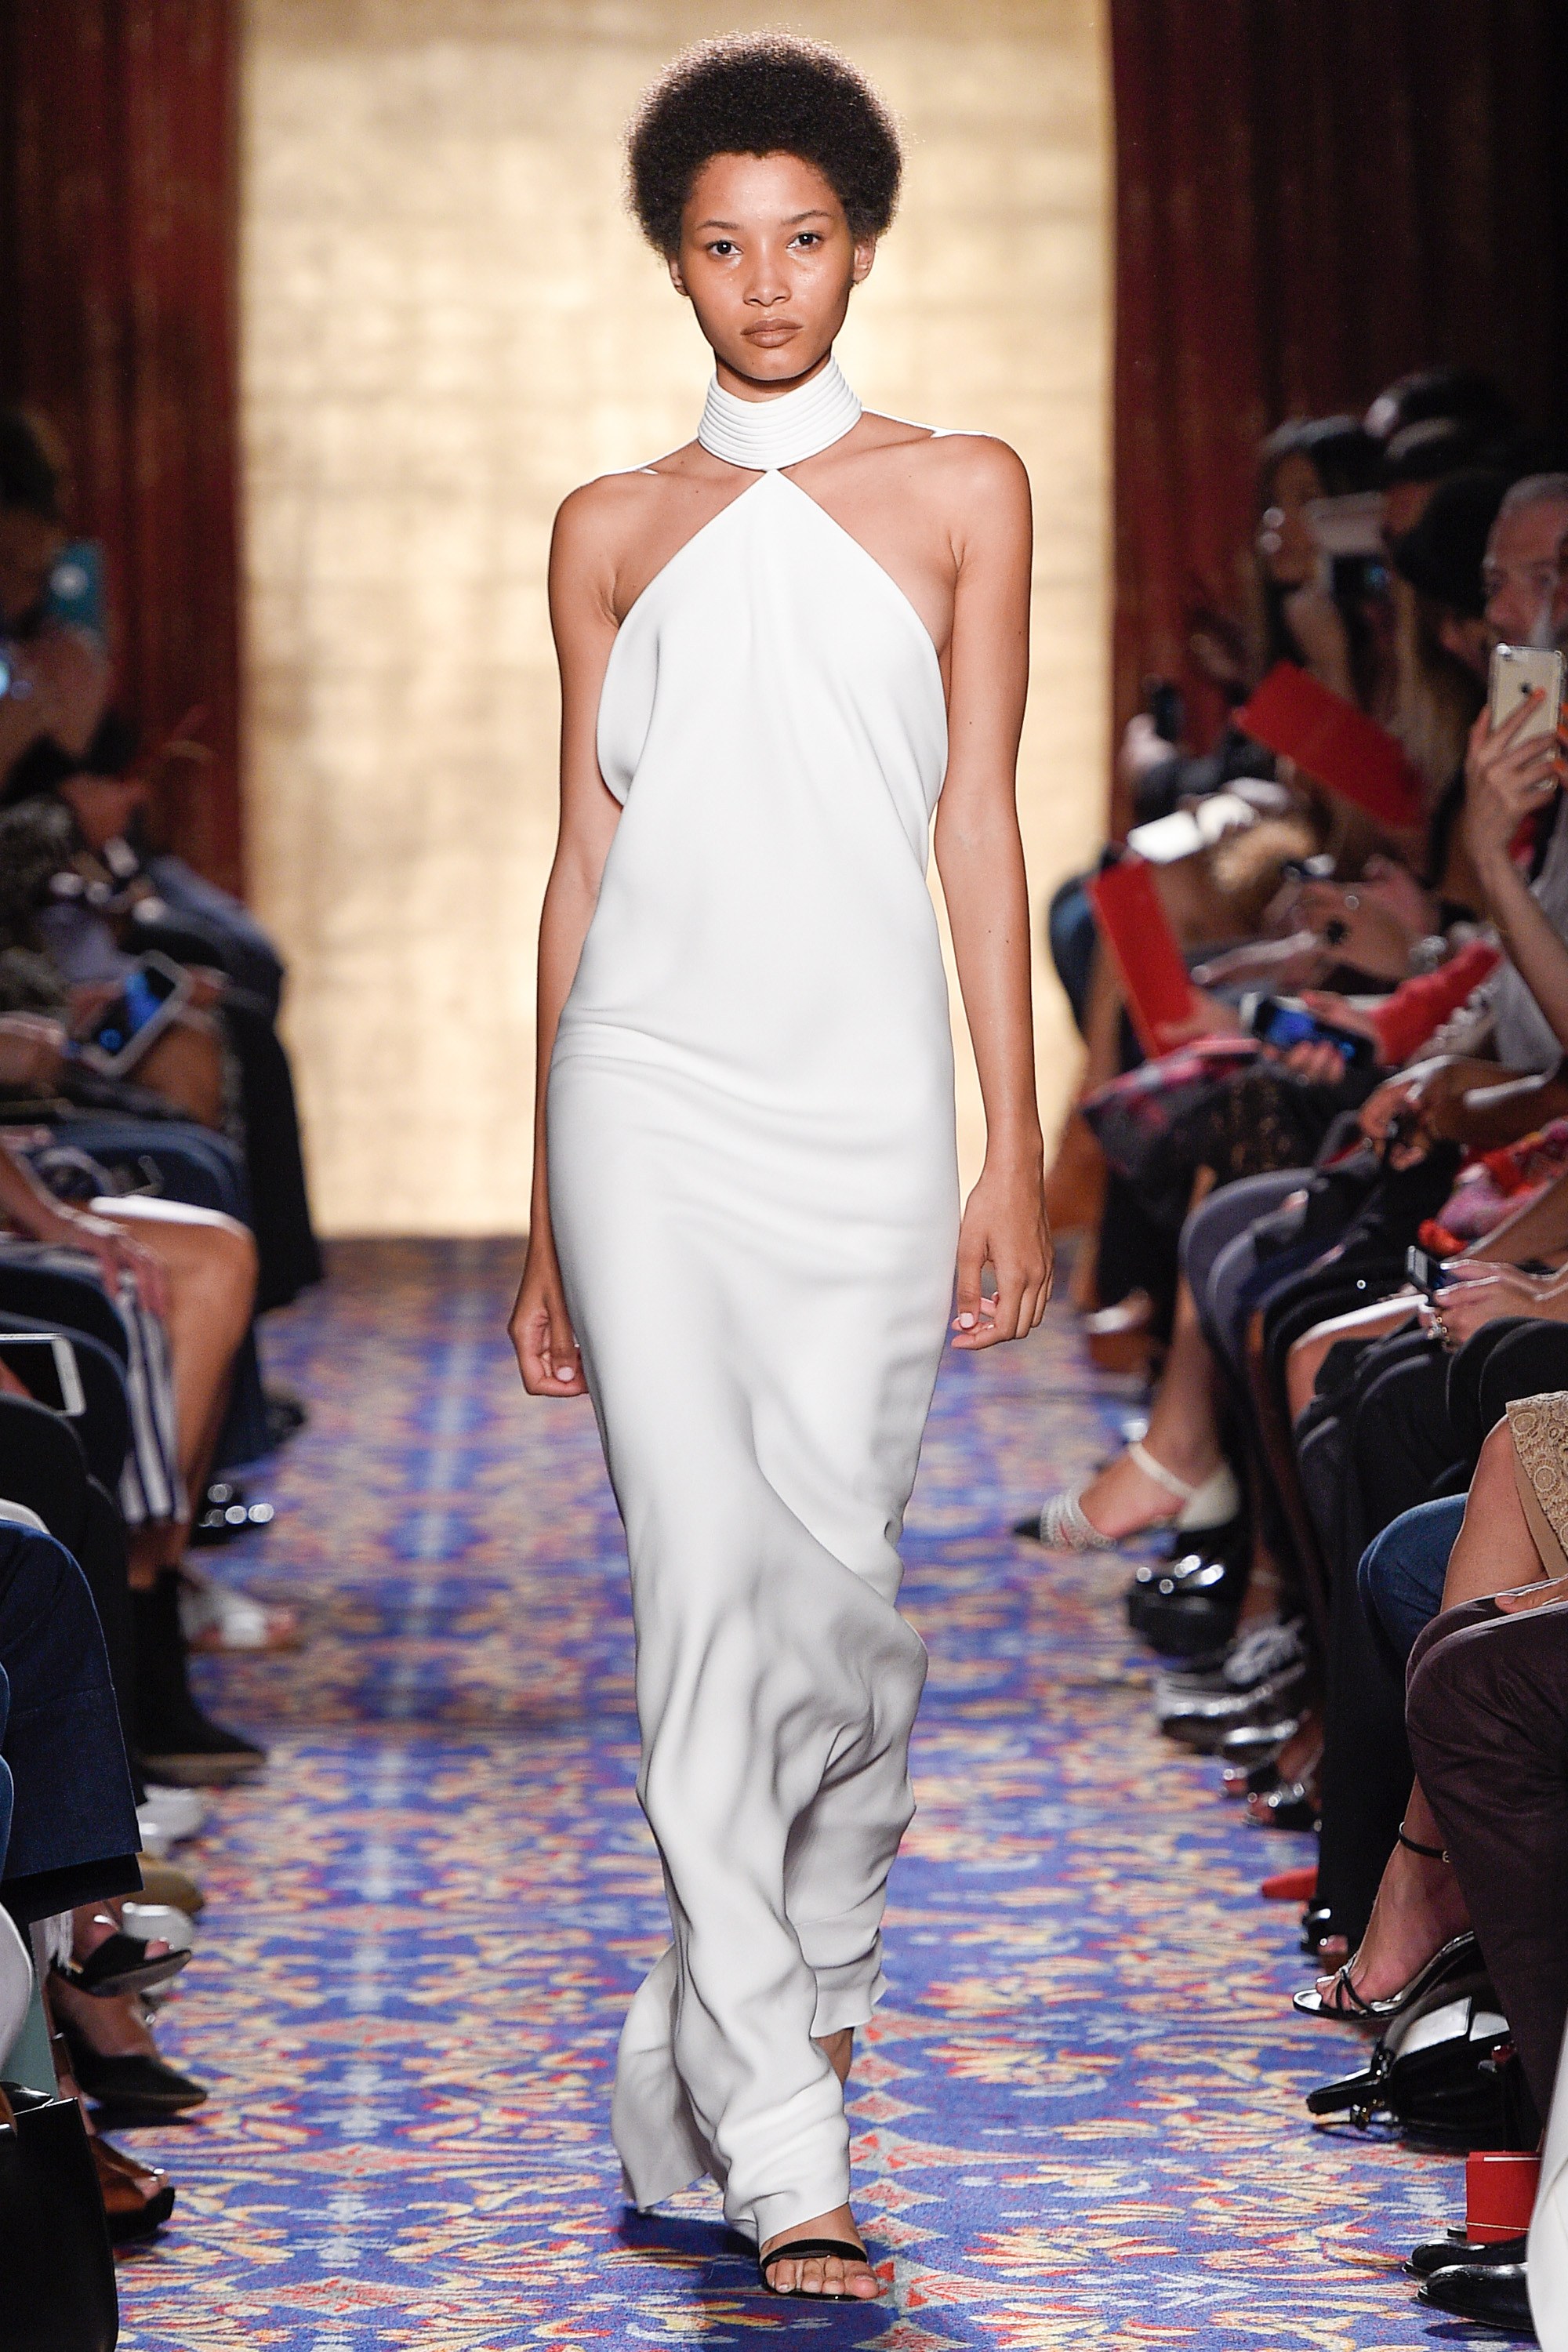 Brandon Maxwell Piped Neck Sheath Gown in Ivory